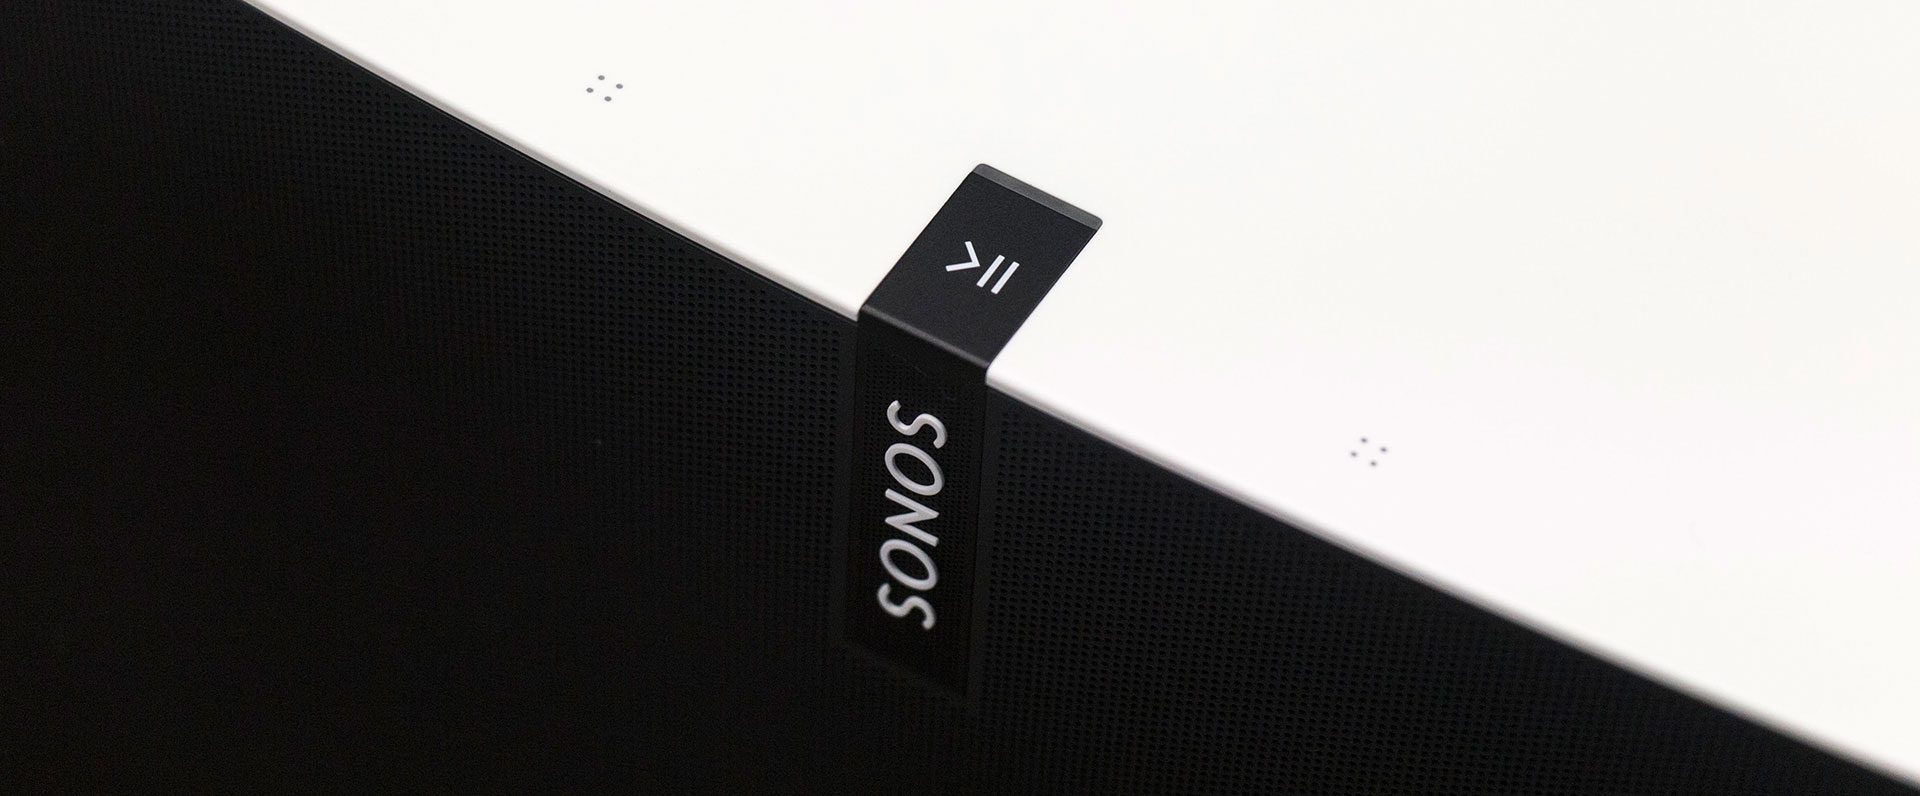 youtube over sonos for mac